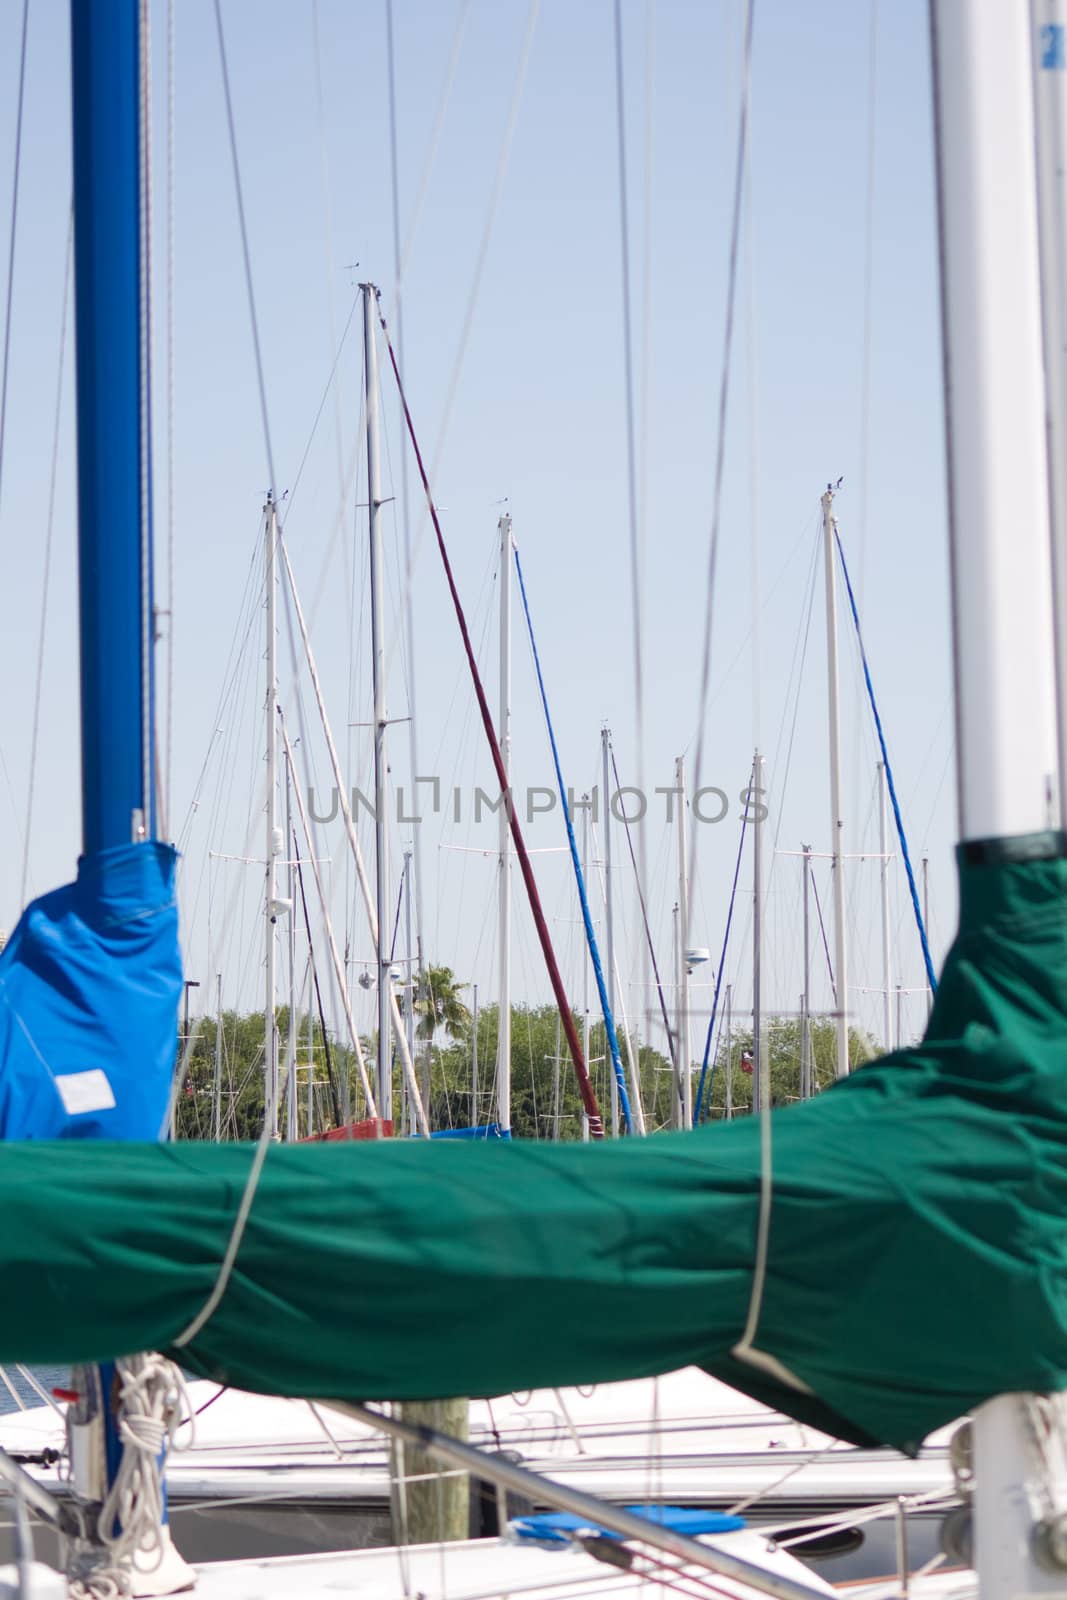 Sailboat Masts and Booms captured at St. Petersburg Marina with blue and green sail covers and lines beautifully framed.
